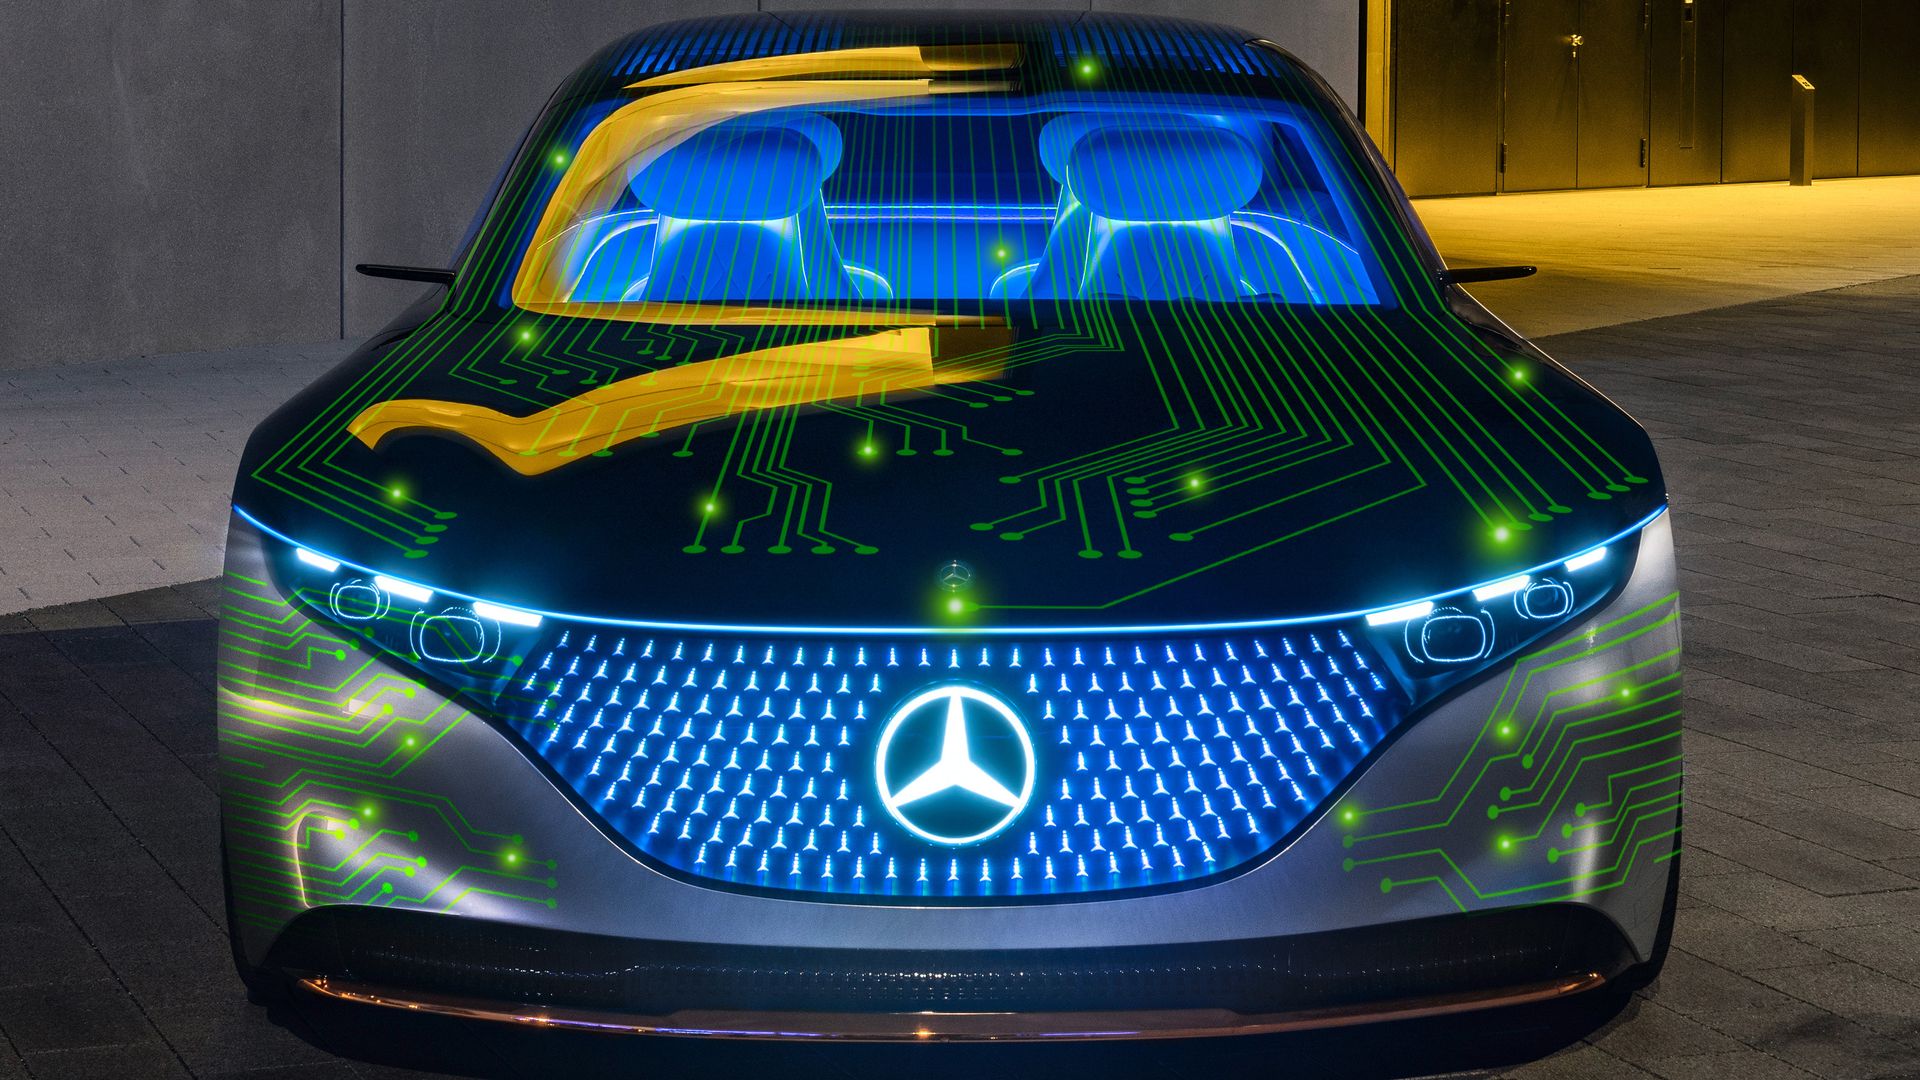 Photo illustration of a Mercedes Benz with green electrical current running through it.